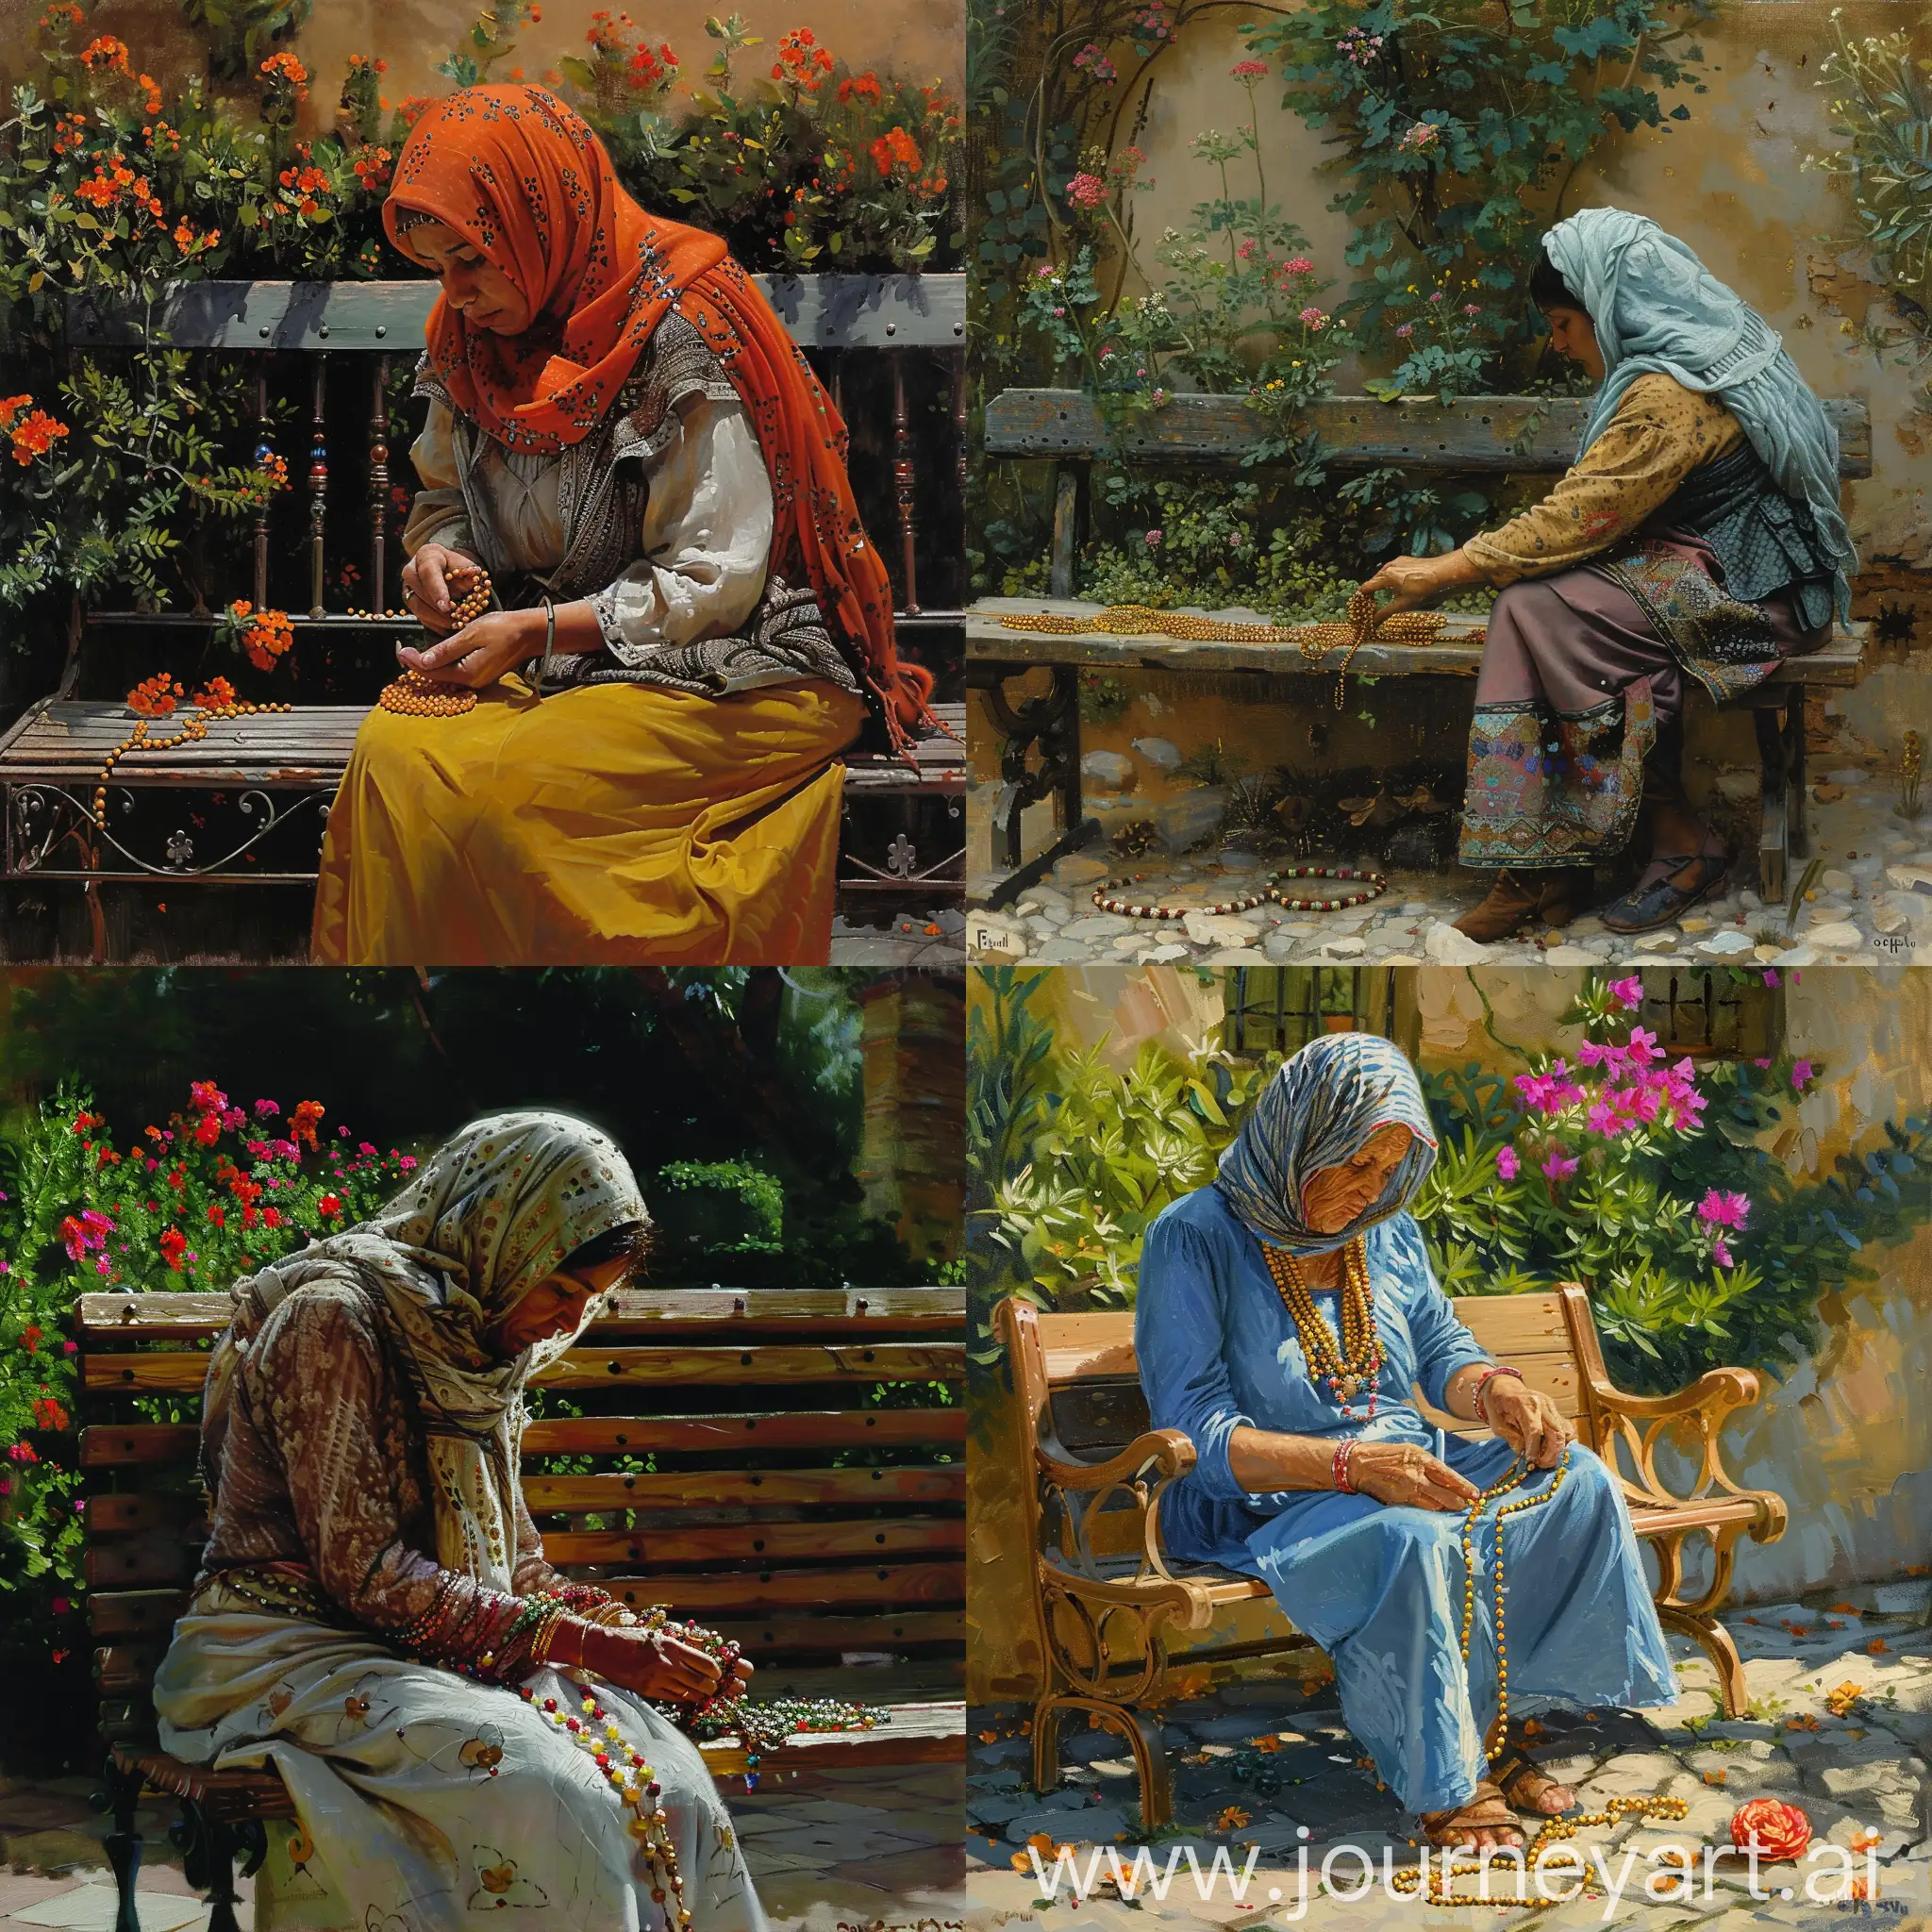 Moroccan-Woman-Counting-Beads-in-Tranquil-Garden-Setting